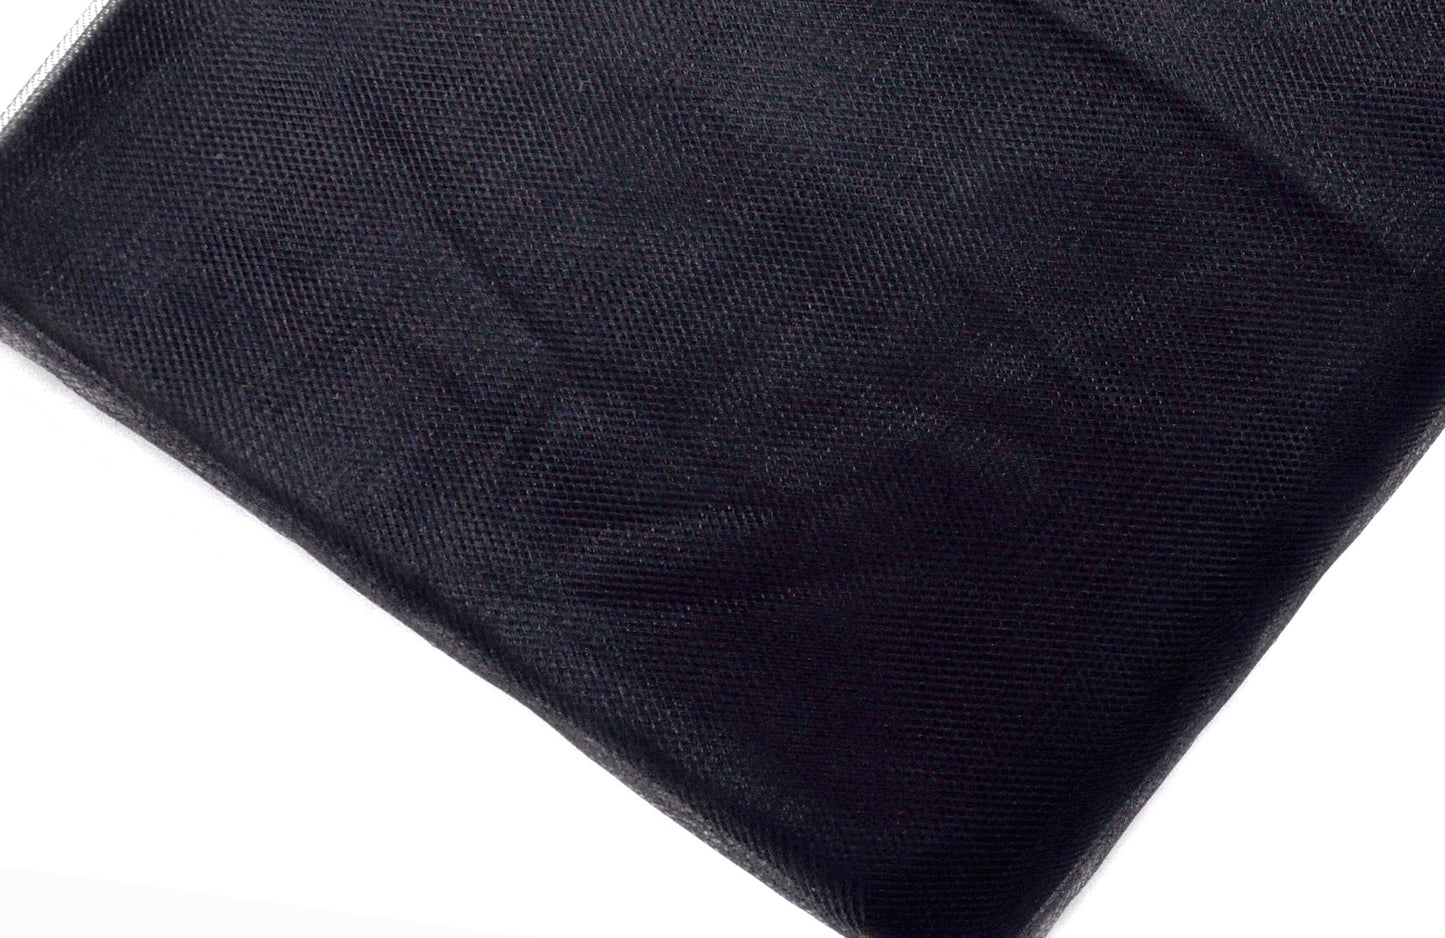 Tulle Fabric - 54" by 40 Yards Bolt - CIT-100-02 BLACK (per roll)